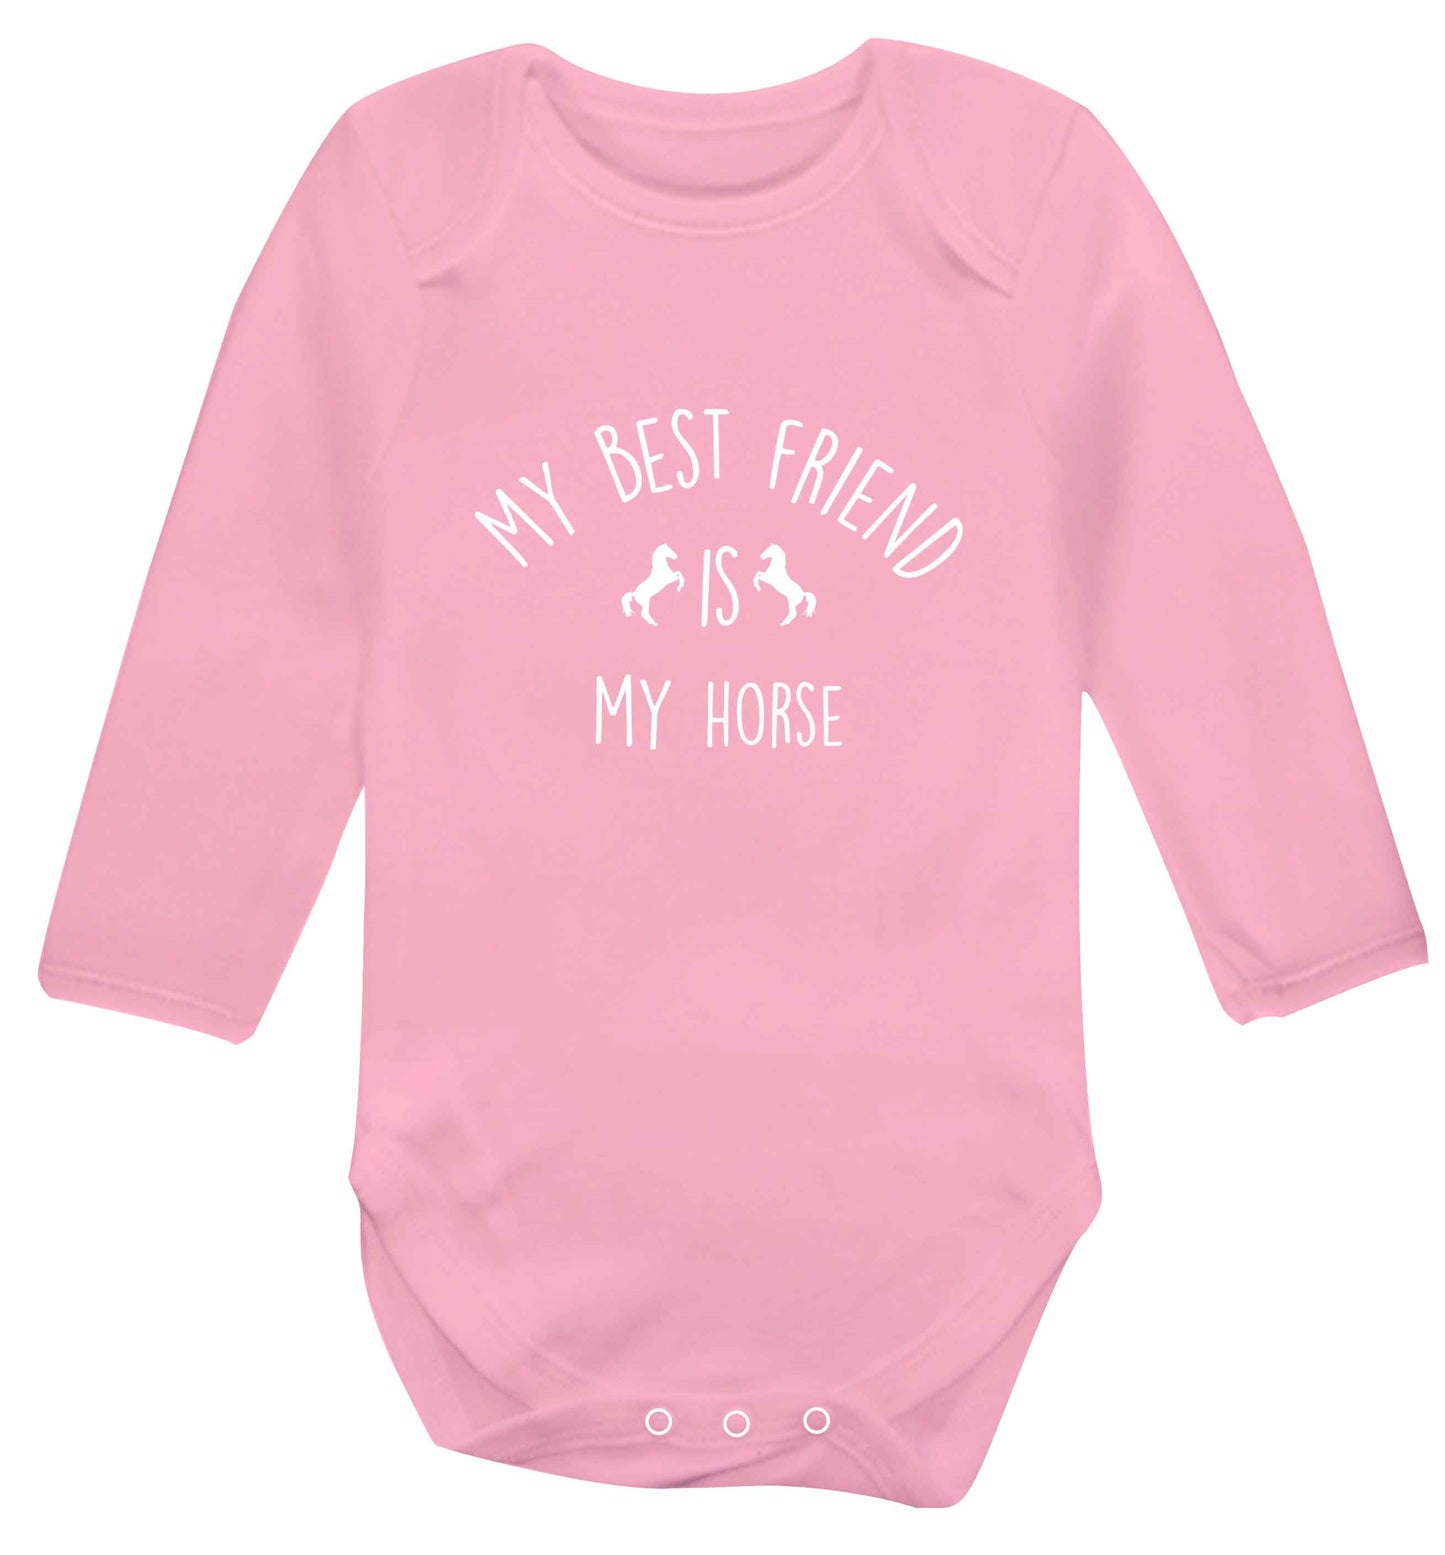 My best friend is my horse baby vest long sleeved pale pink 6-12 months